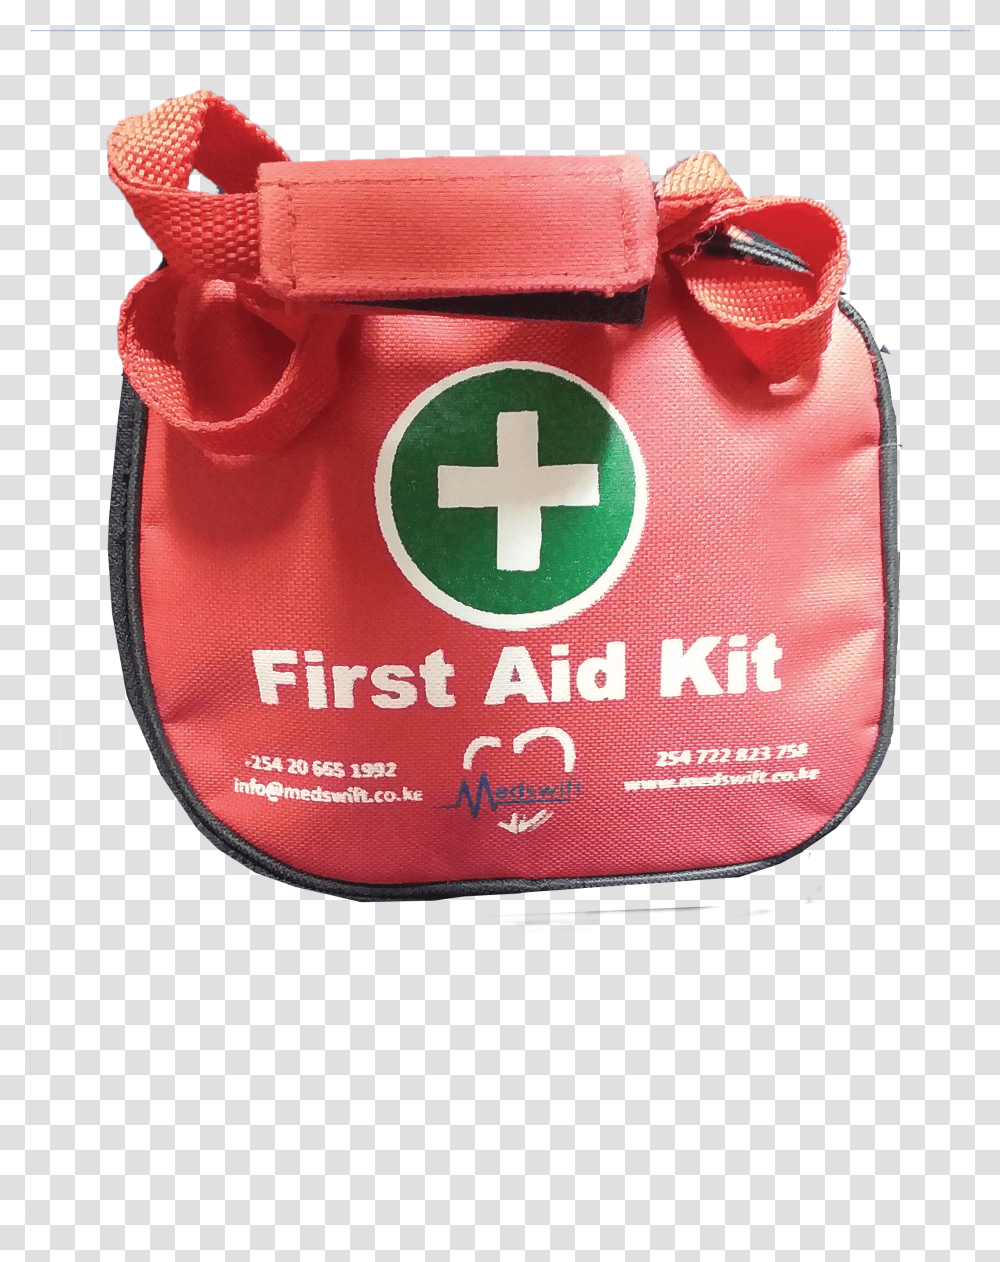 First Aid Kit For The Car Medswift First Aid Kit Transparent Png